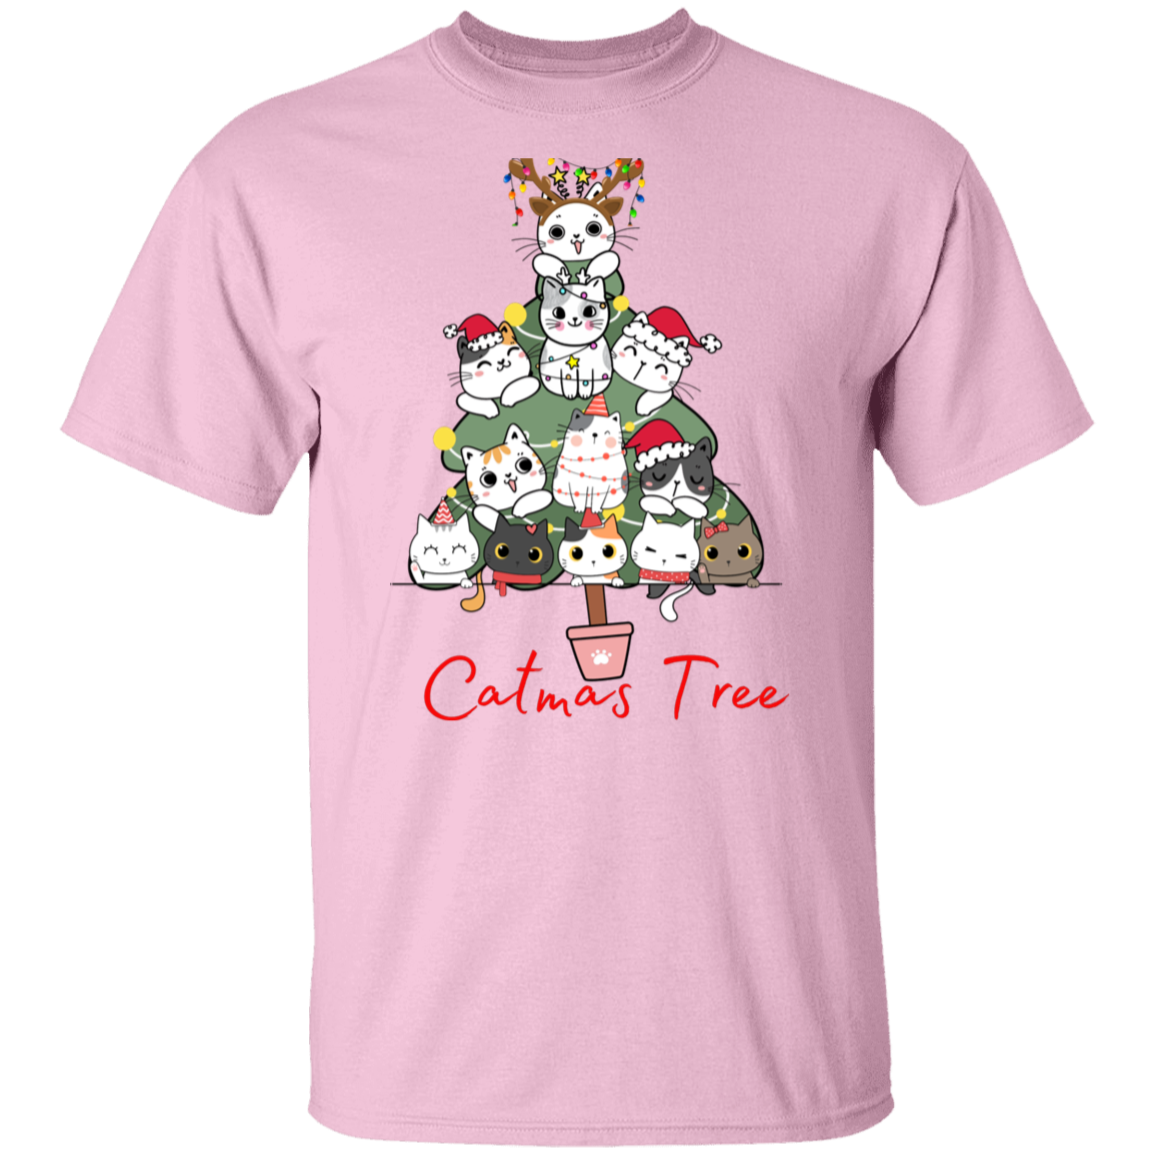 CatMas Tree for Crazy Cat Lady T-Shirt